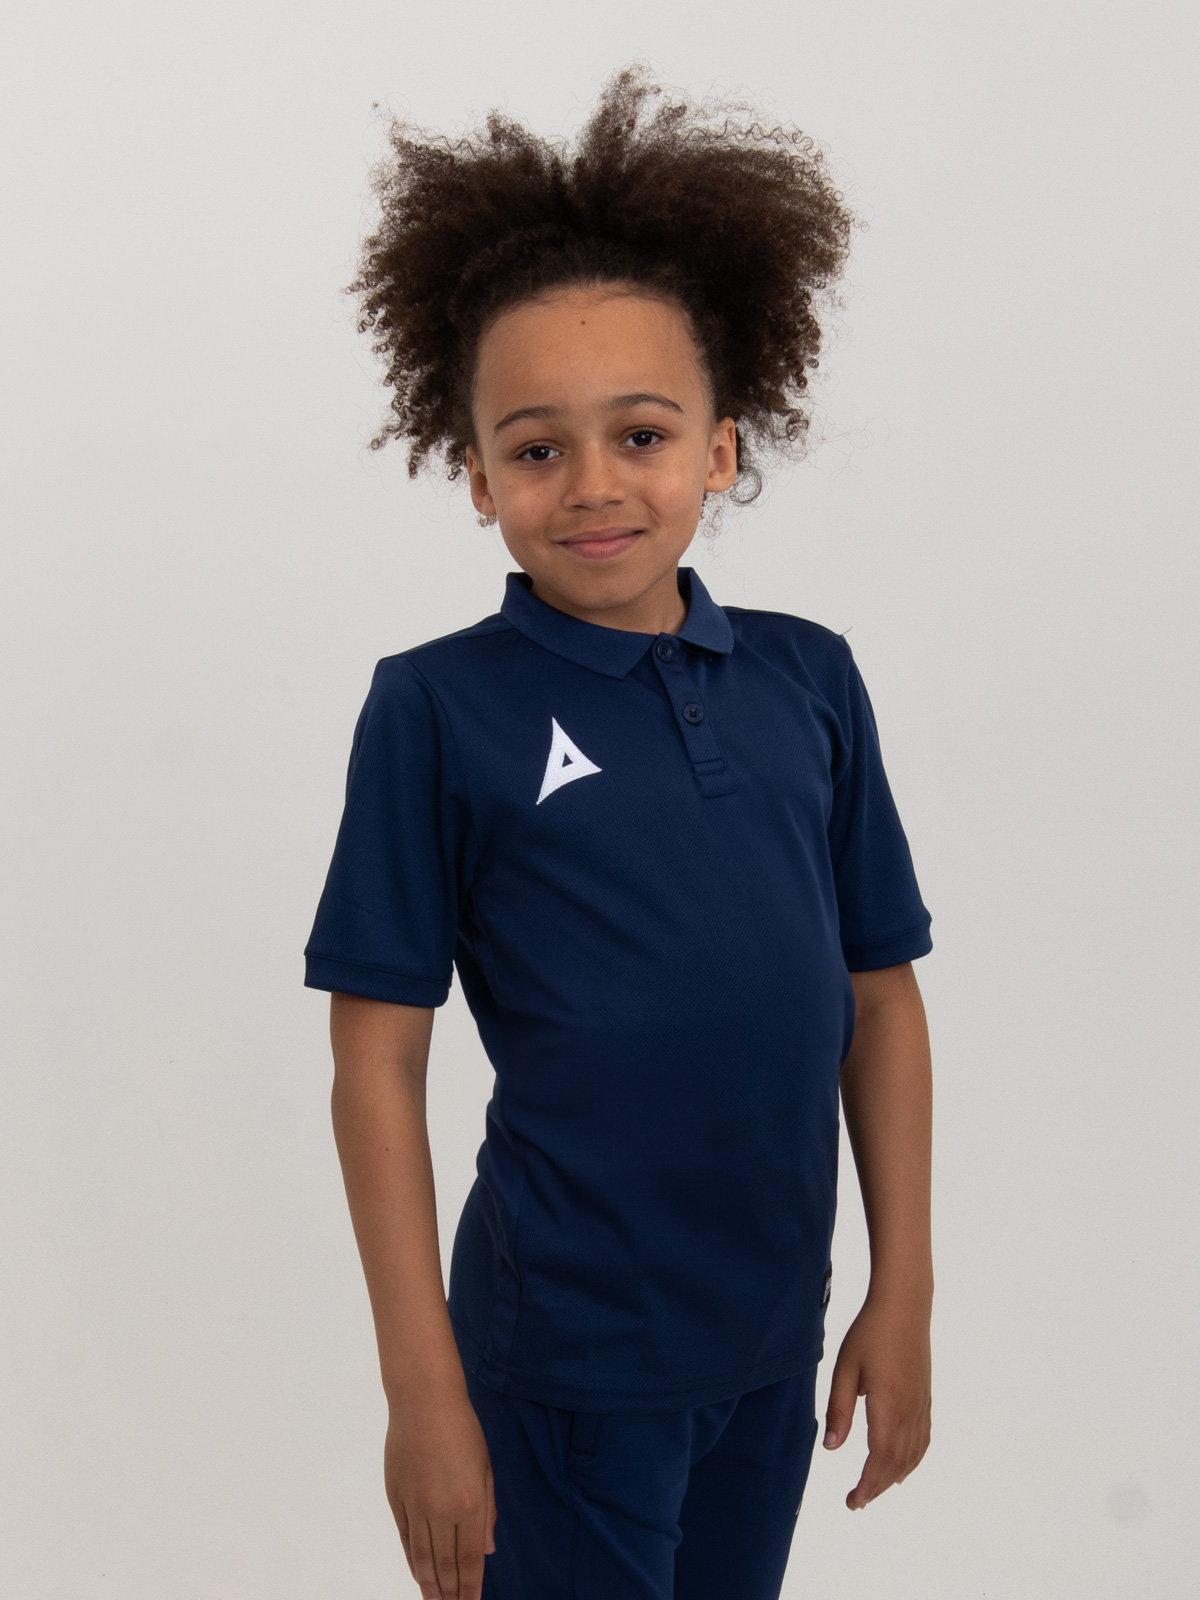 a kids polo shirt in navy blue helps juniors look smart for presentation nights and travel between games.